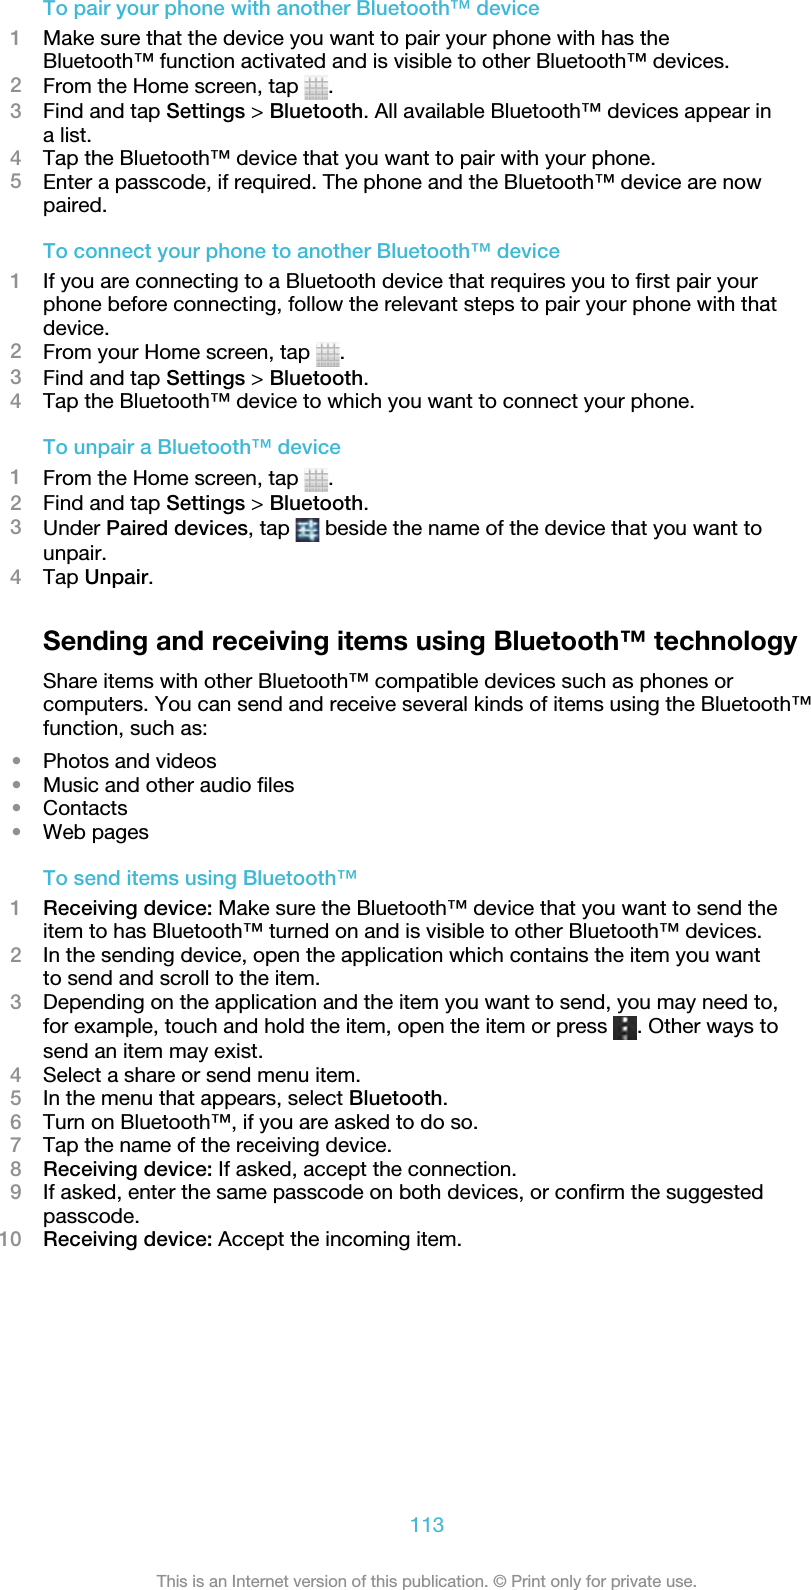 To pair your phone with another Bluetooth™ device1Make sure that the device you want to pair your phone with has theBluetooth™ function activated and is visible to other Bluetooth™ devices.2From the Home screen, tap  .3Find and tap Settings &gt; Bluetooth. All available Bluetooth™ devices appear ina list.4Tap the Bluetooth™ device that you want to pair with your phone.5Enter a passcode, if required. The phone and the Bluetooth™ device are nowpaired.To connect your phone to another Bluetooth™ device1If you are connecting to a Bluetooth device that requires you to first pair yourphone before connecting, follow the relevant steps to pair your phone with thatdevice.2From your Home screen, tap  .3Find and tap Settings &gt; Bluetooth.4Tap the Bluetooth™ device to which you want to connect your phone.To unpair a Bluetooth™ device1From the Home screen, tap  .2Find and tap Settings &gt; Bluetooth.3Under Paired devices, tap   beside the name of the device that you want tounpair.4Tap Unpair.Sending and receiving items using Bluetooth™ technologyShare items with other Bluetooth™ compatible devices such as phones orcomputers. You can send and receive several kinds of items using the Bluetooth™function, such as:•Photos and videos•Music and other audio files•Contacts•Web pagesTo send items using Bluetooth™1Receiving device: Make sure the Bluetooth™ device that you want to send theitem to has Bluetooth™ turned on and is visible to other Bluetooth™ devices.2In the sending device, open the application which contains the item you wantto send and scroll to the item.3Depending on the application and the item you want to send, you may need to,for example, touch and hold the item, open the item or press  . Other ways tosend an item may exist.4Select a share or send menu item.5In the menu that appears, select Bluetooth.6Turn on Bluetooth™, if you are asked to do so.7Tap the name of the receiving device.8Receiving device: If asked, accept the connection.9If asked, enter the same passcode on both devices, or confirm the suggestedpasscode.10 Receiving device: Accept the incoming item.113This is an Internet version of this publication. © Print only for private use.